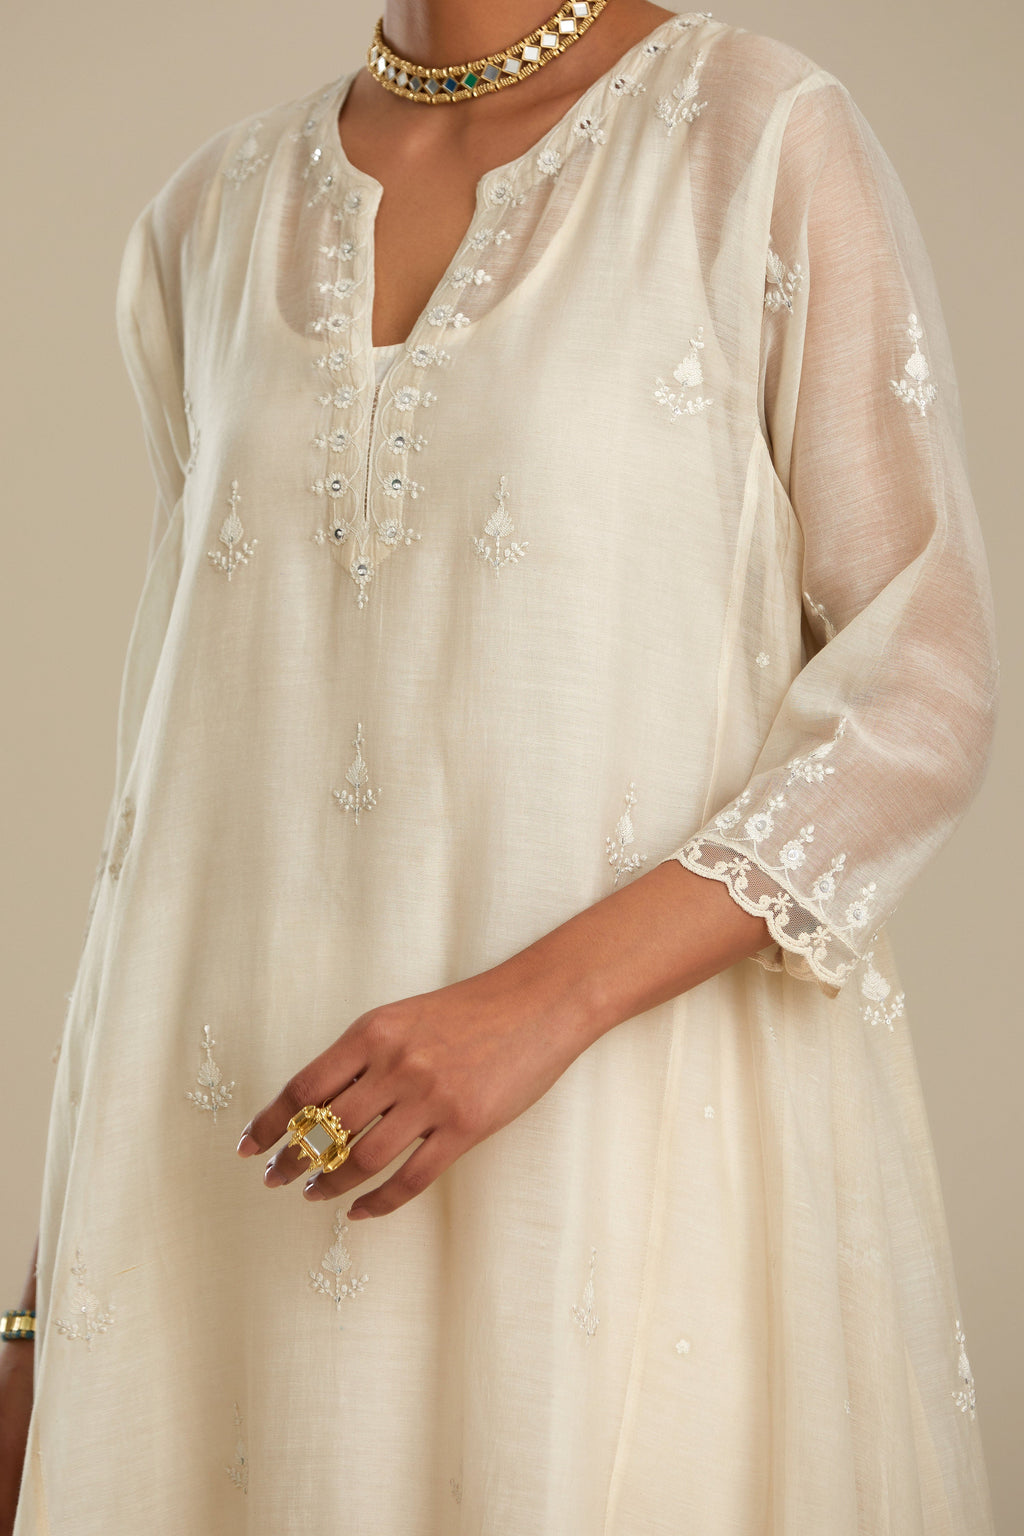 Off white cotton Chanderi kurta set with asymmetric hem, highlighted with sequins, beads and lace.